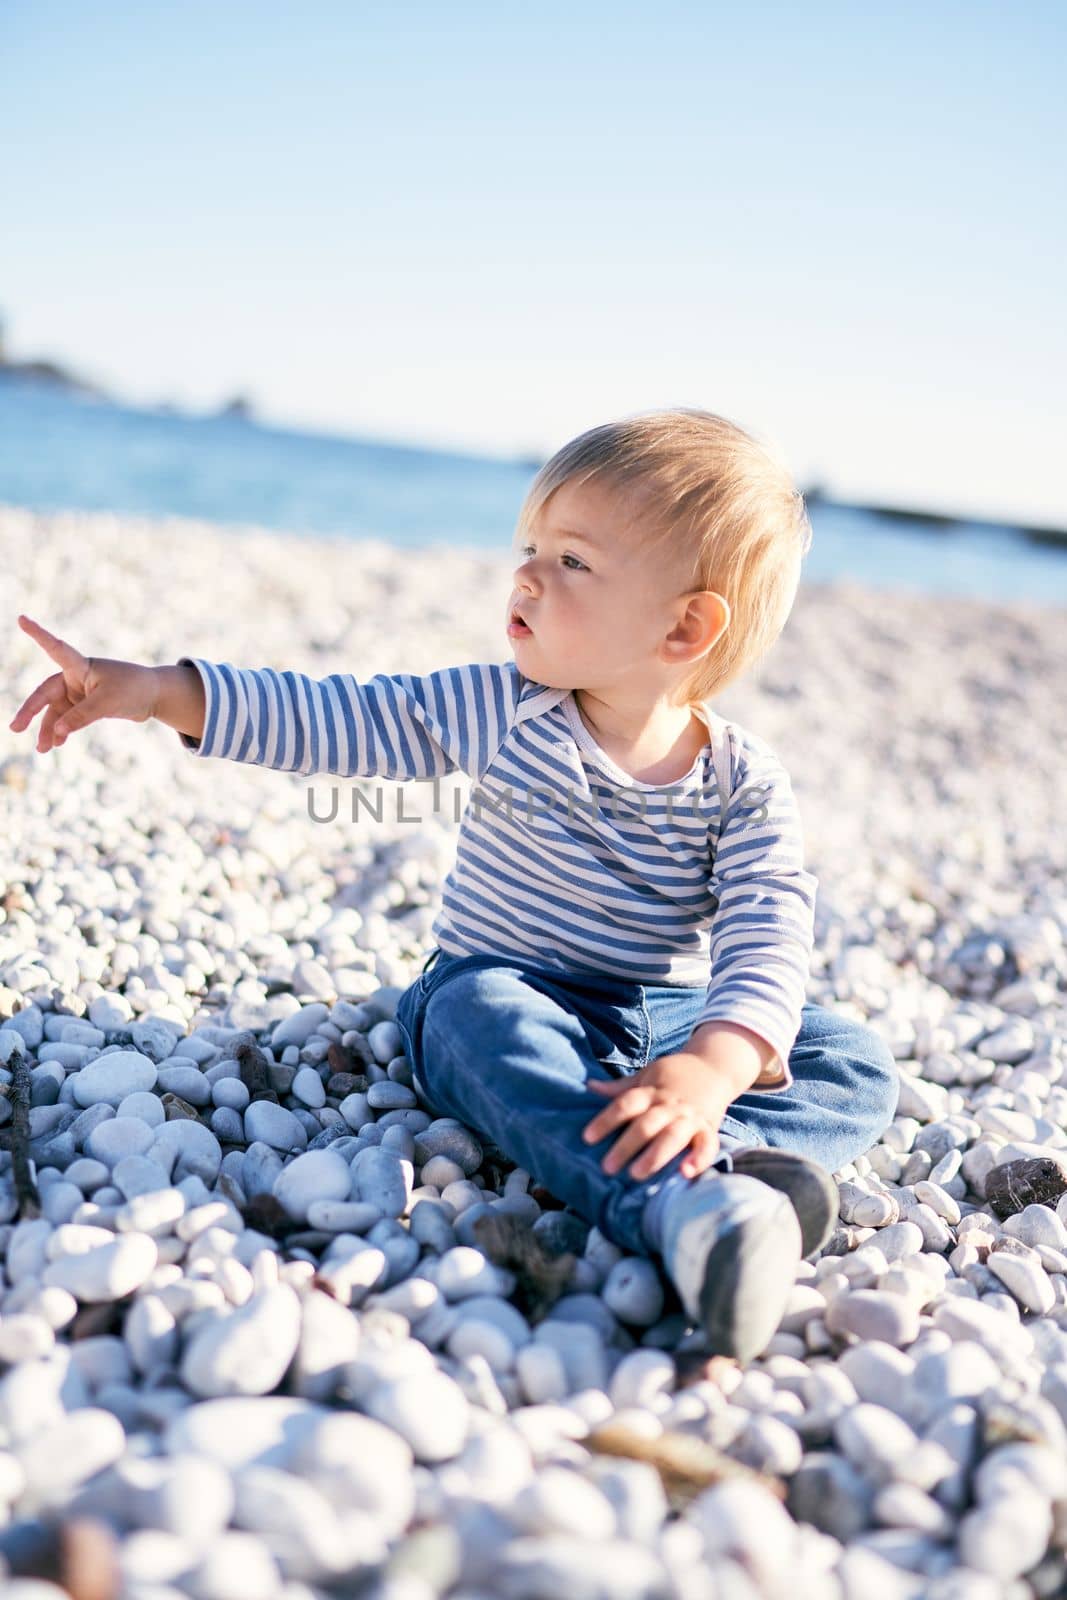 Kid sits on a pebble beach by the sea and points his finger into the distance. High quality photo